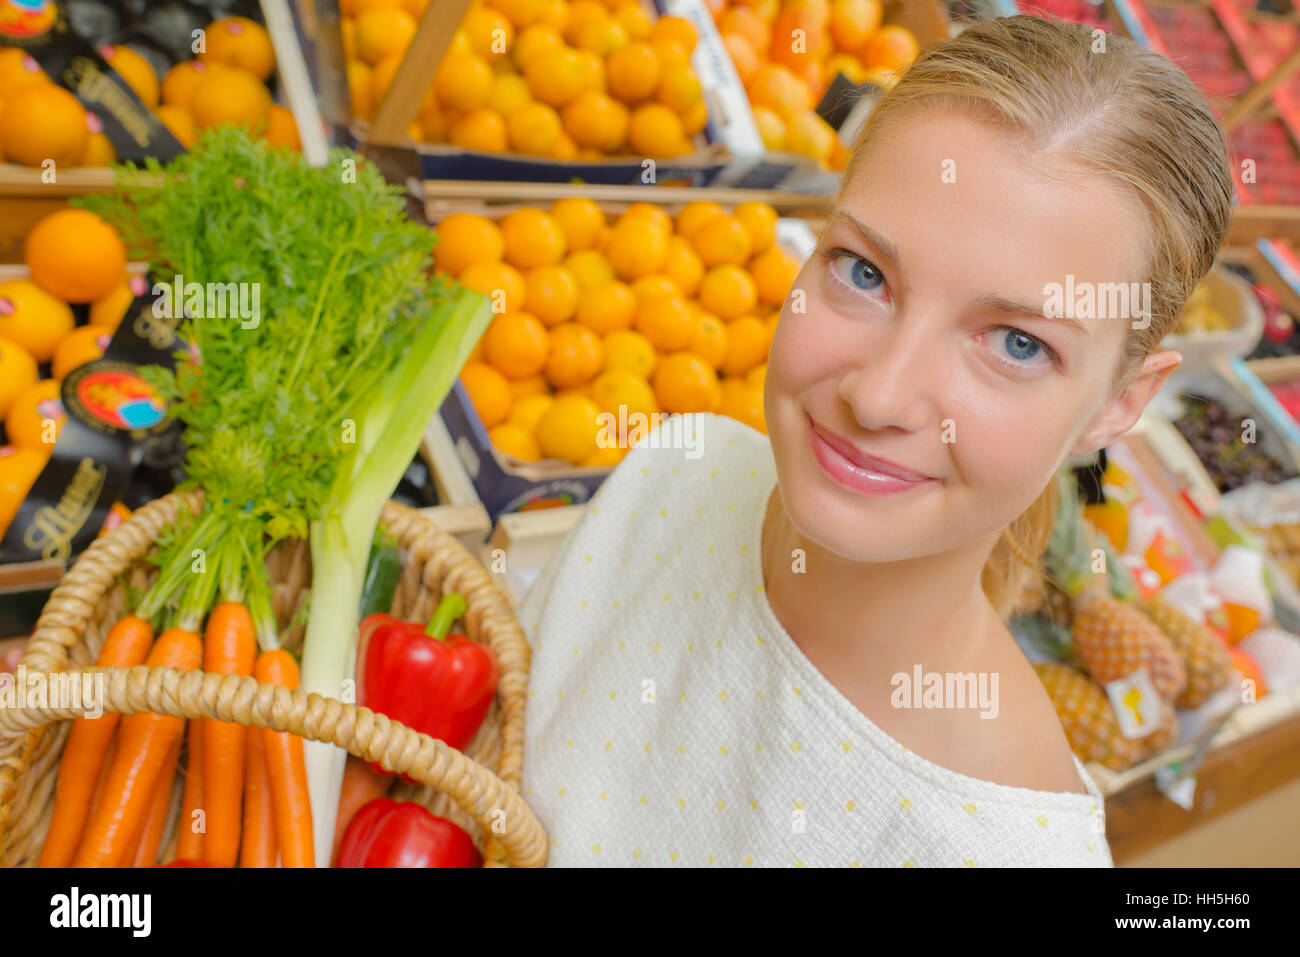 Woman buying vegetables Banque D'Images